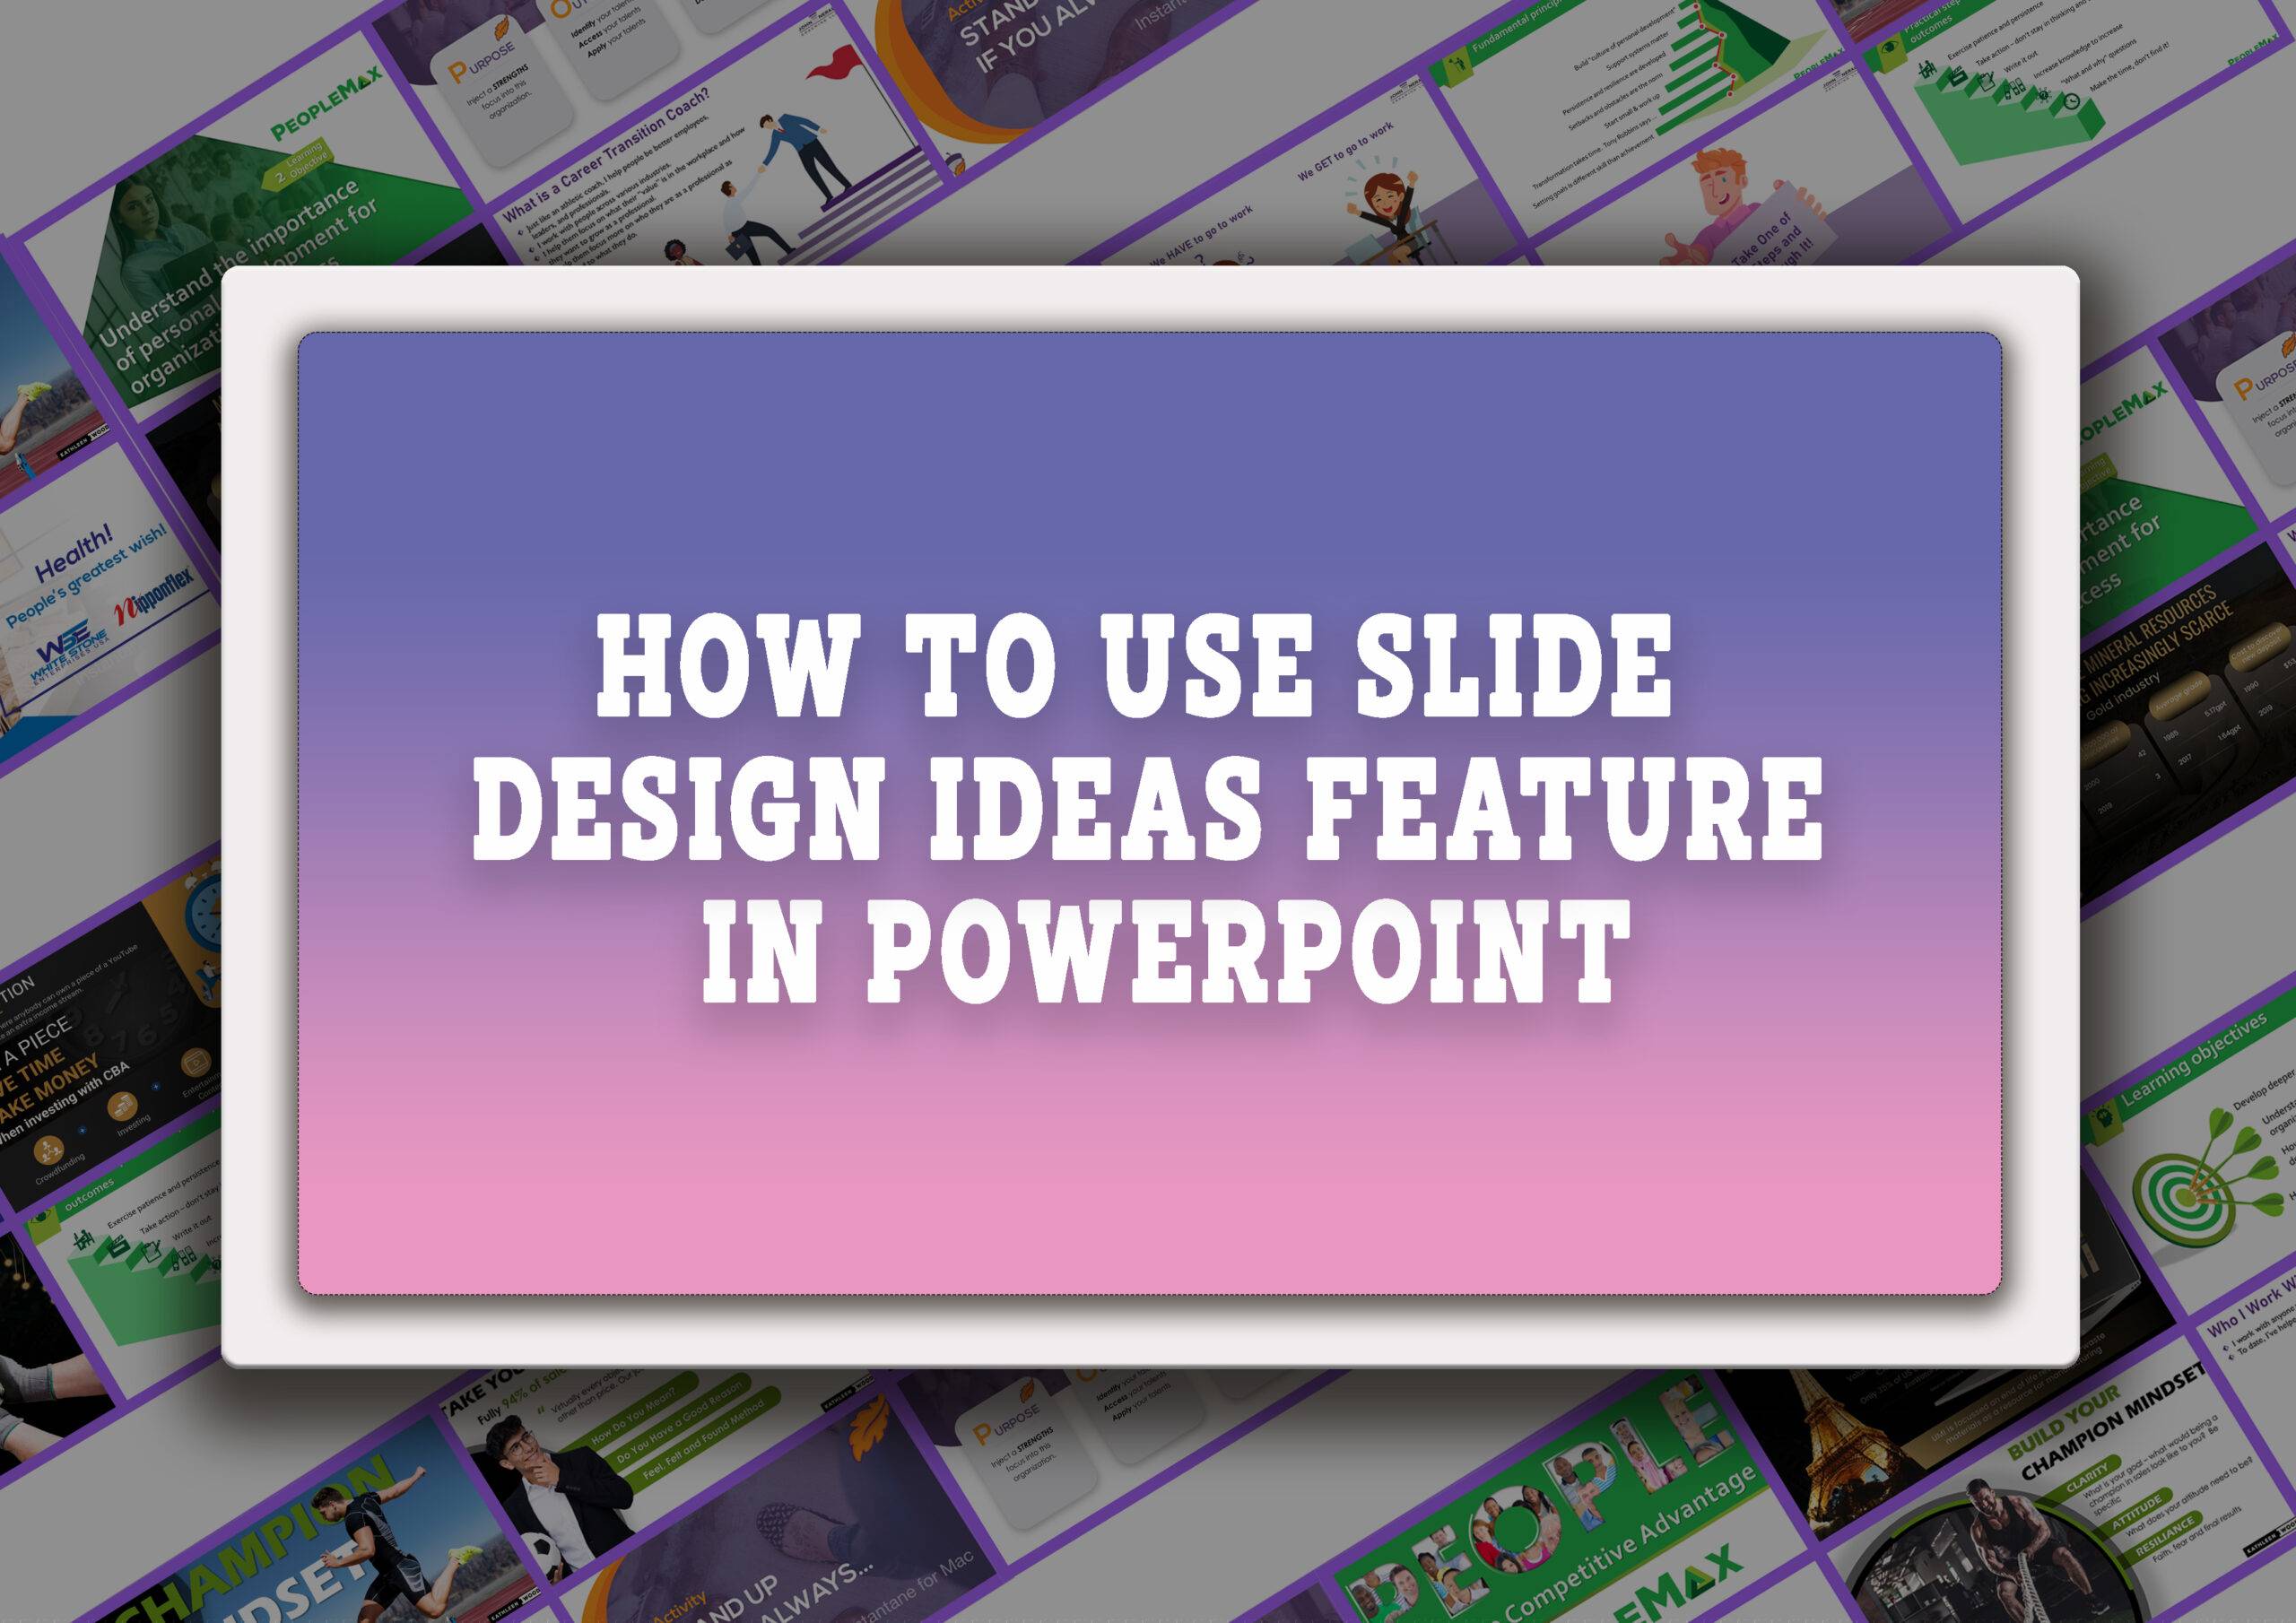 Applying design ideas to the slide in PowerPoint